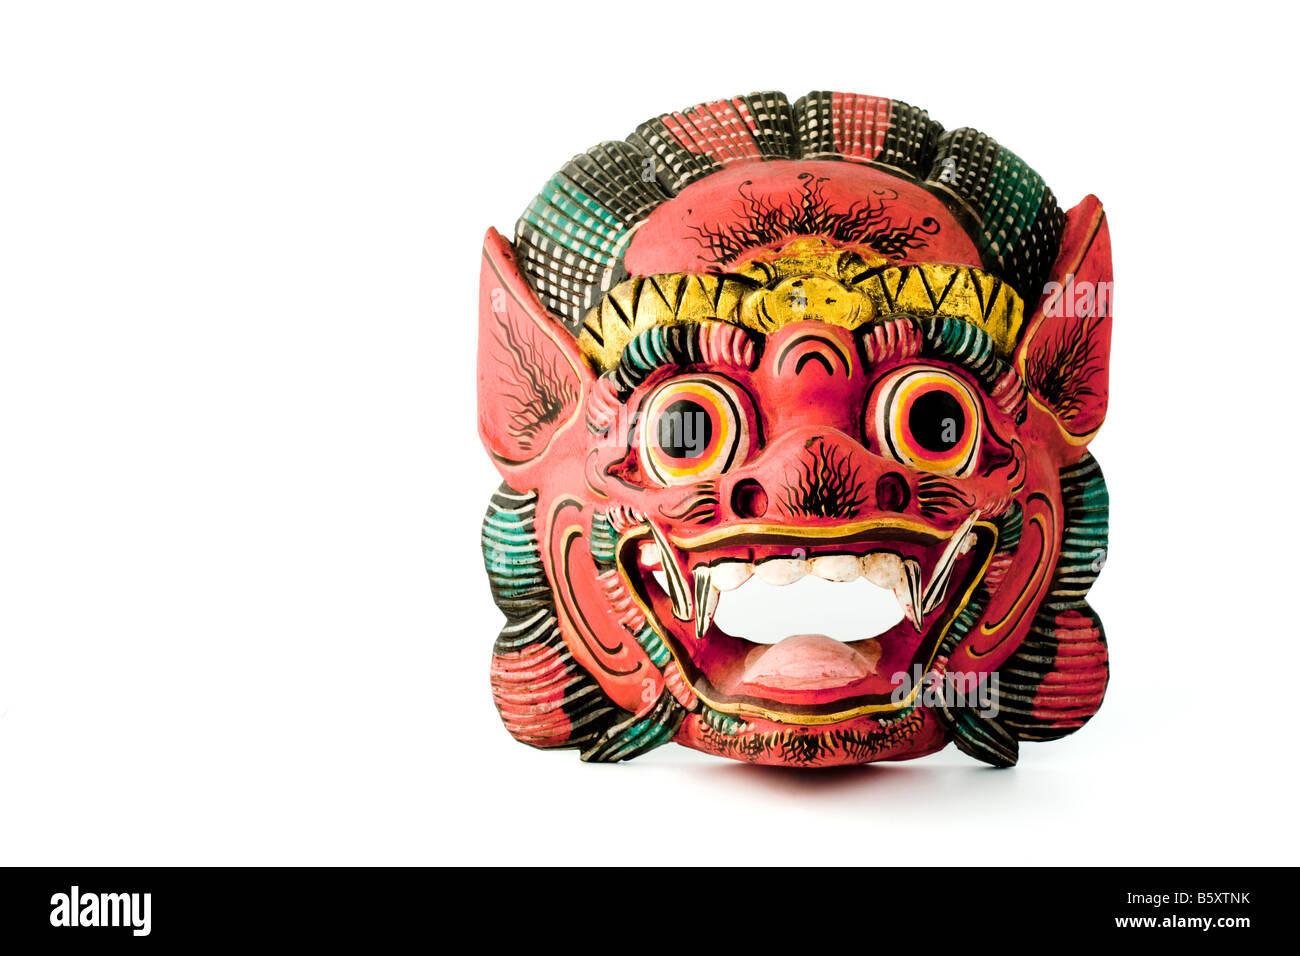 Traditional mask from Thailand Stock Photo - Alamy